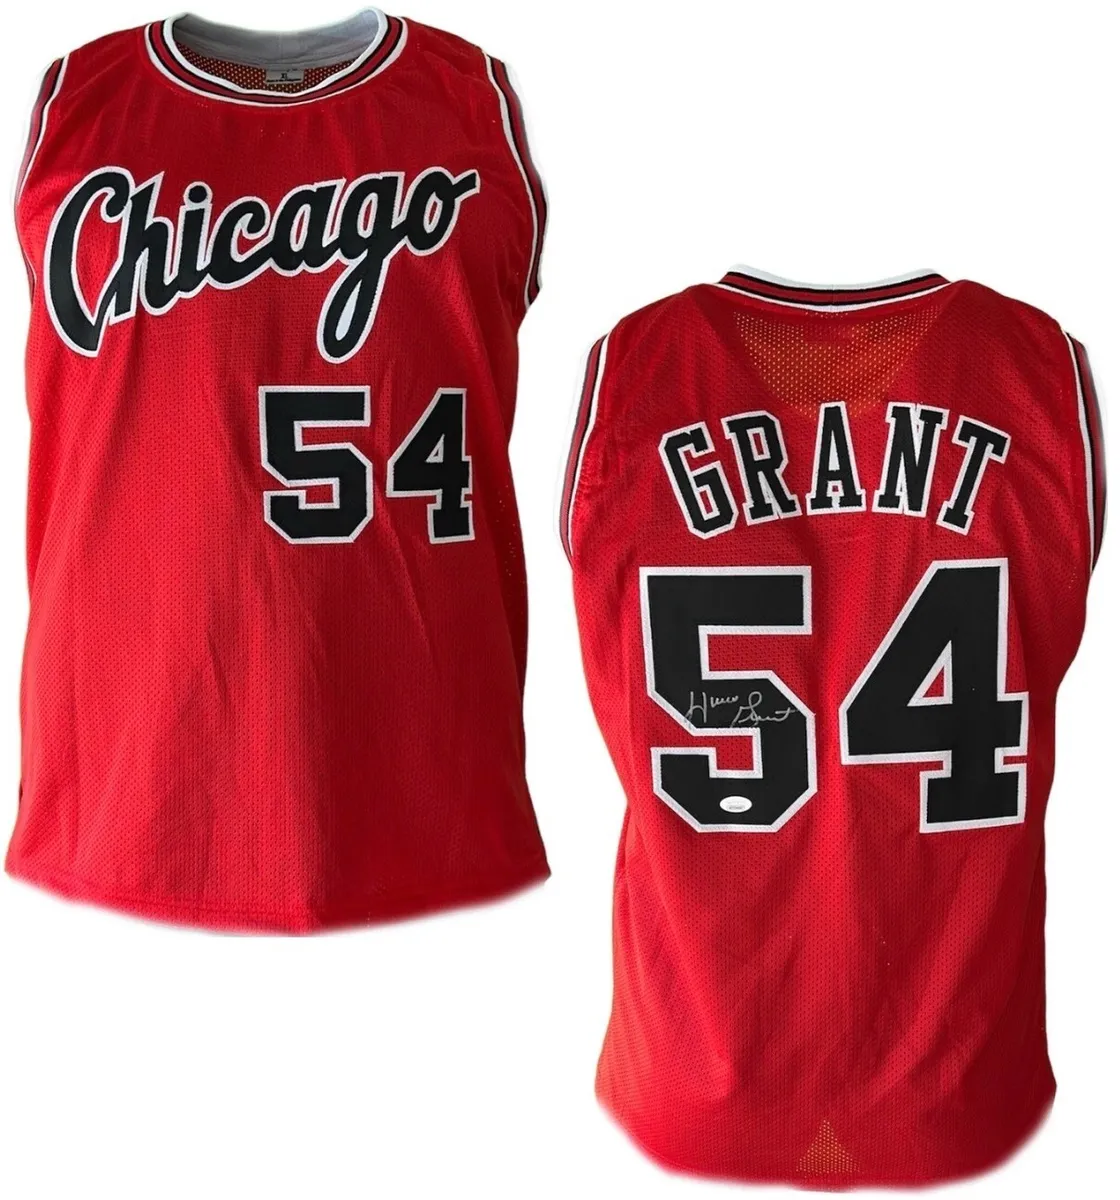 Horace Grant Autographed Prostyle Chicago Red Custom Jersey JSA